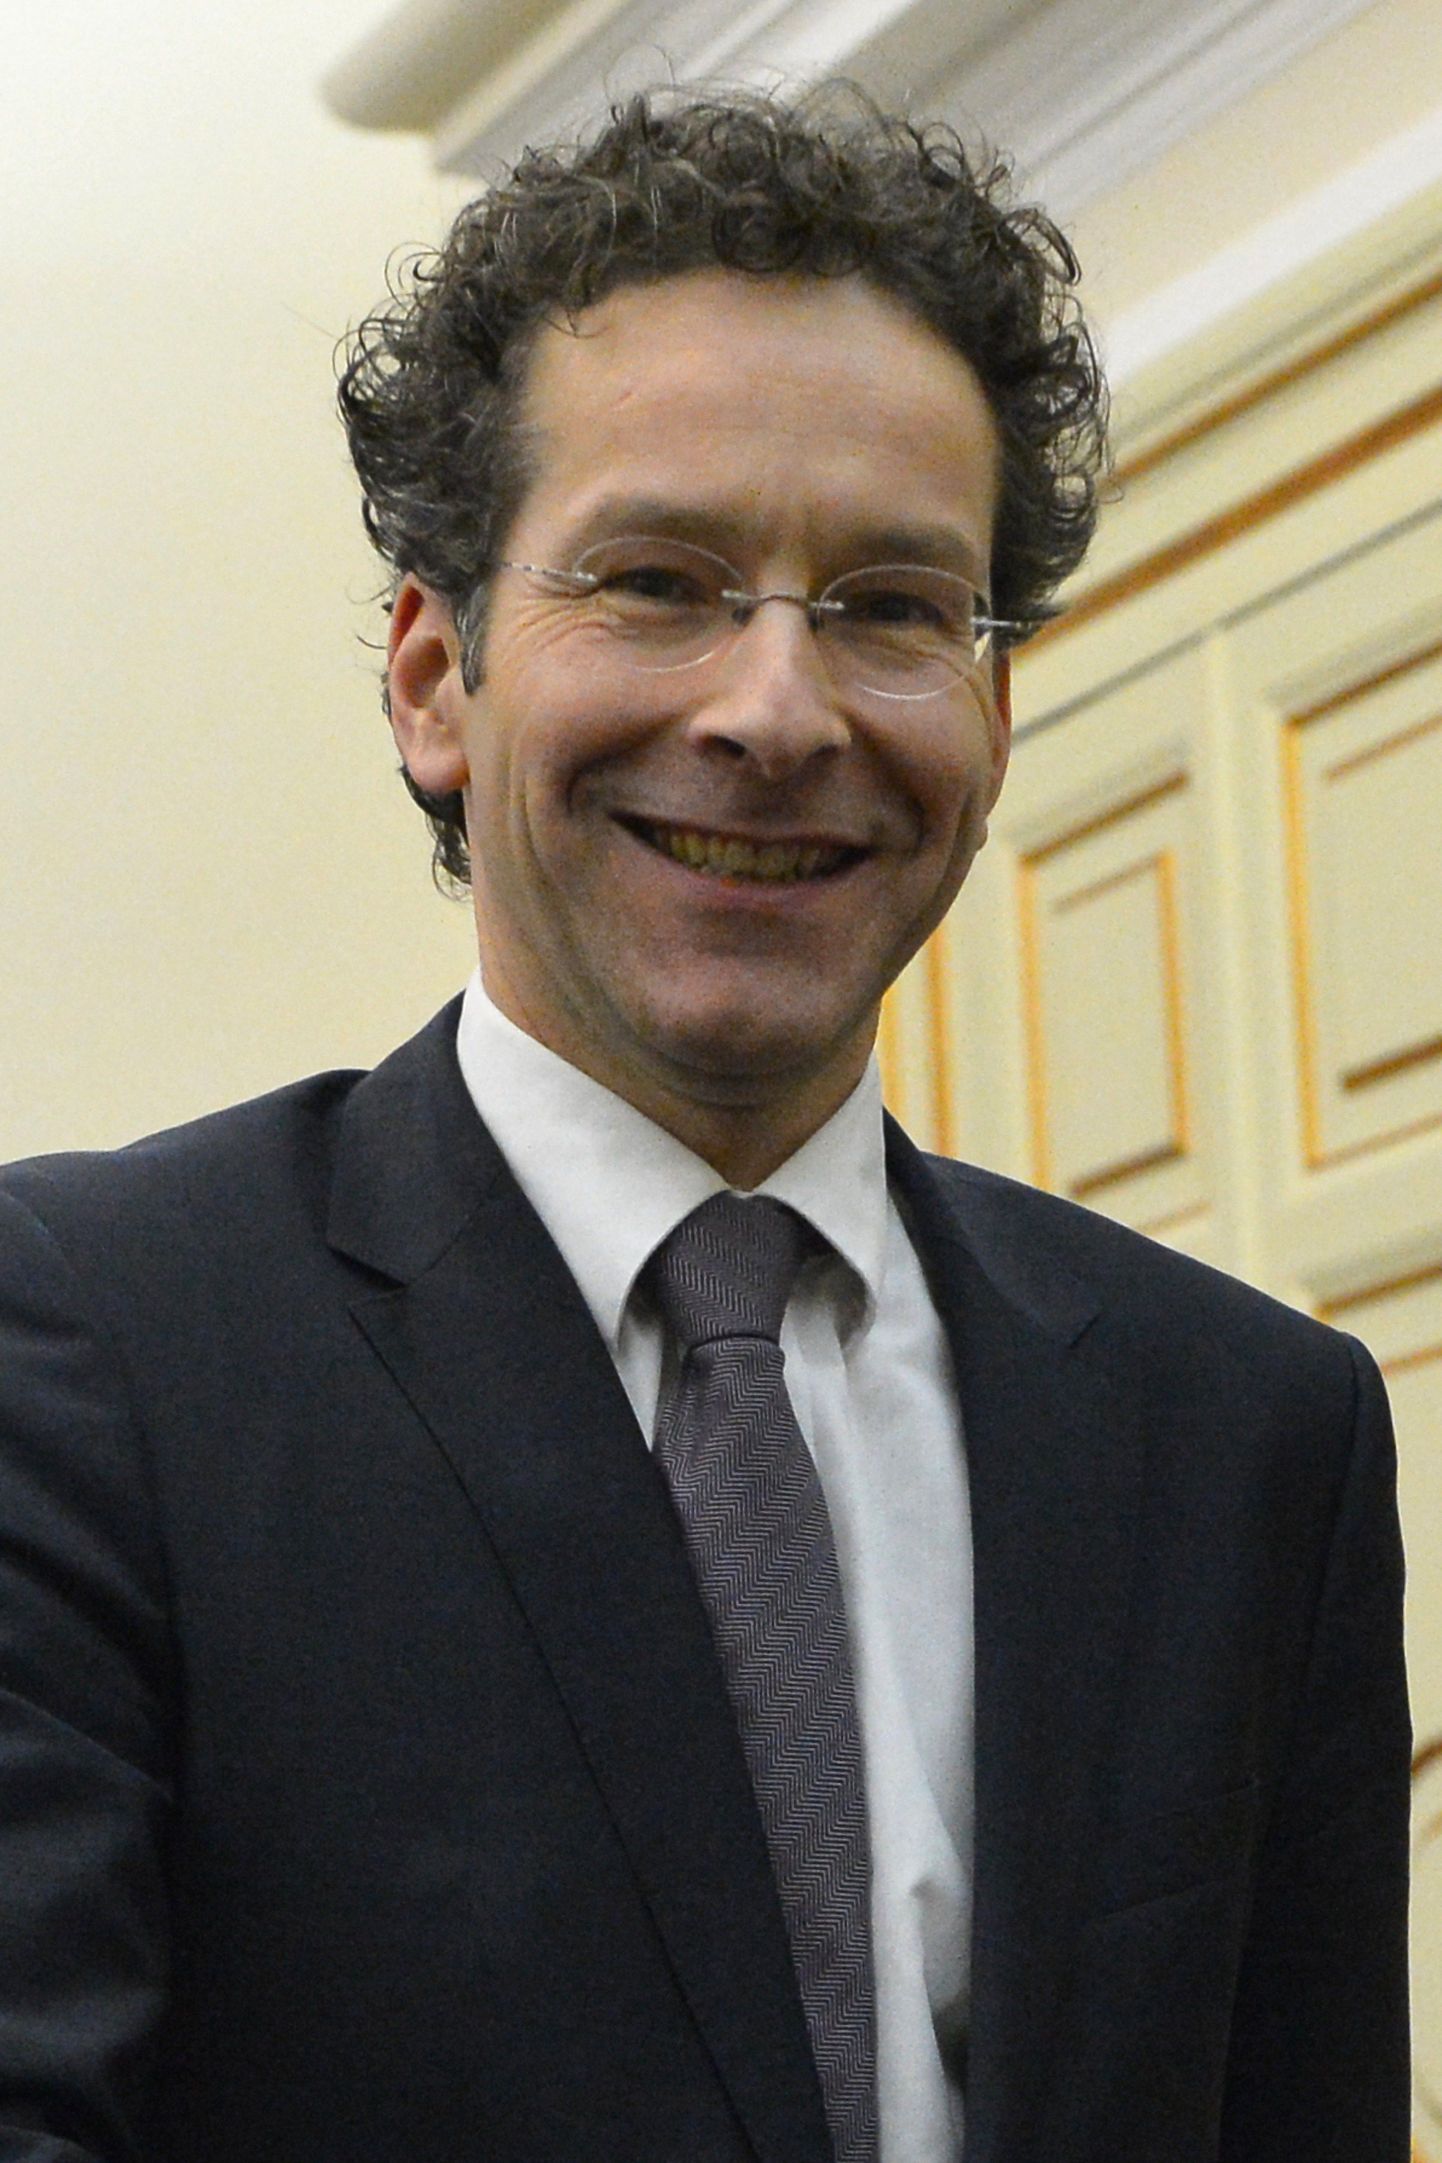 The netherlands' finance minister Jeroen Dijsselbloem poses during a meeting with his Italian counterpart on January 8, 2013 at the Italian finance ministry in Rome. AFP PHOTO / VINCENZO PINTO